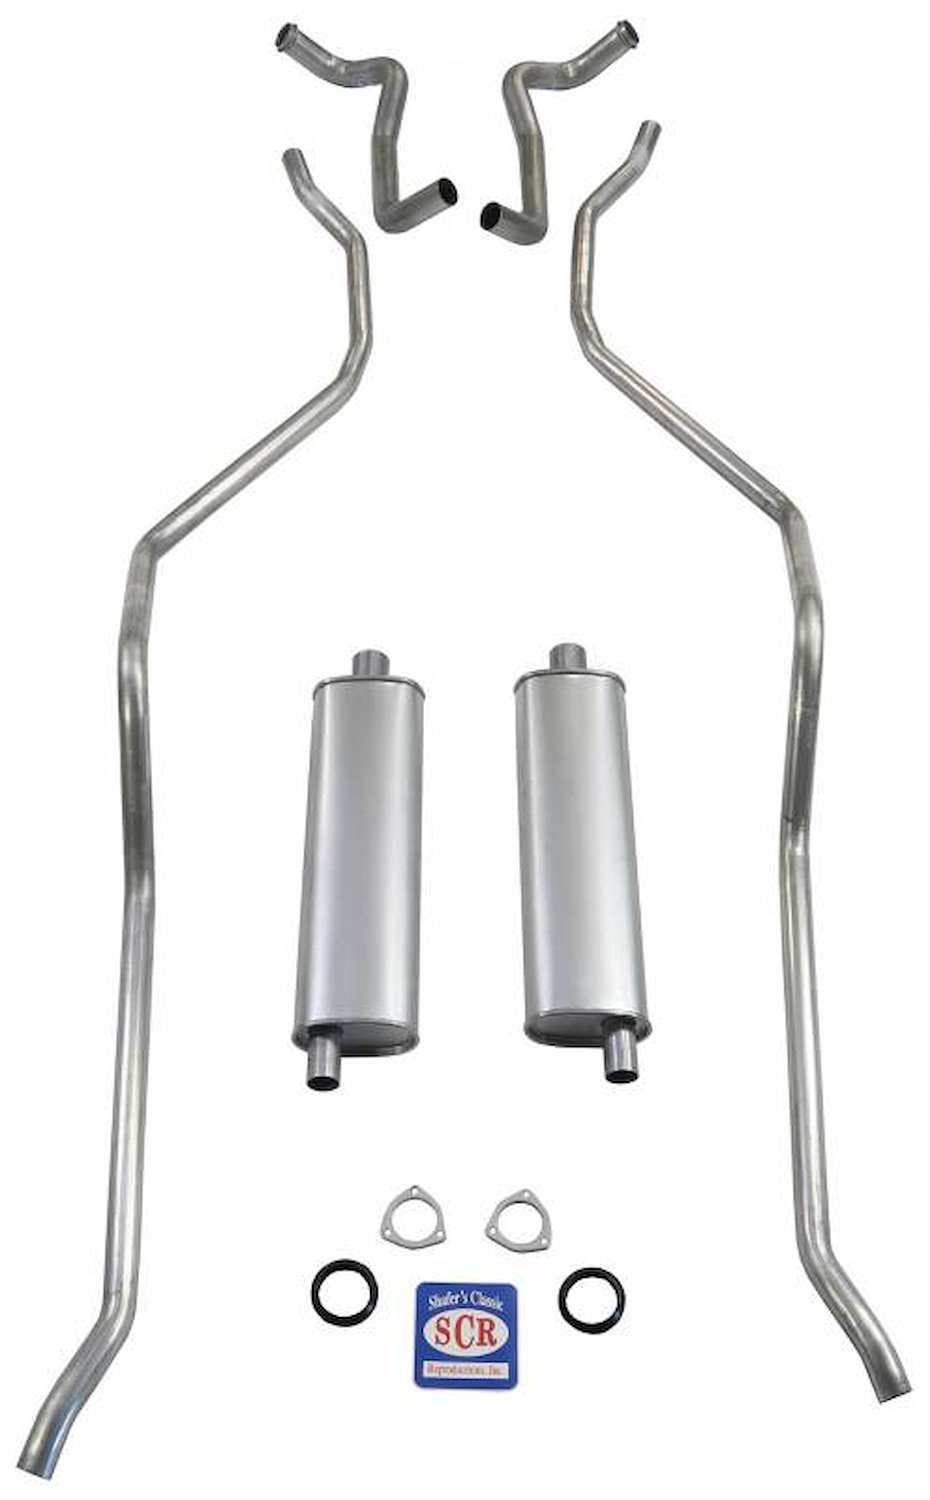 73072S 1959 El Camino Exhaust System 348 Hi-Performance w/ 2-1/2 in. Dual Exhaust, 304 Stainless Steel